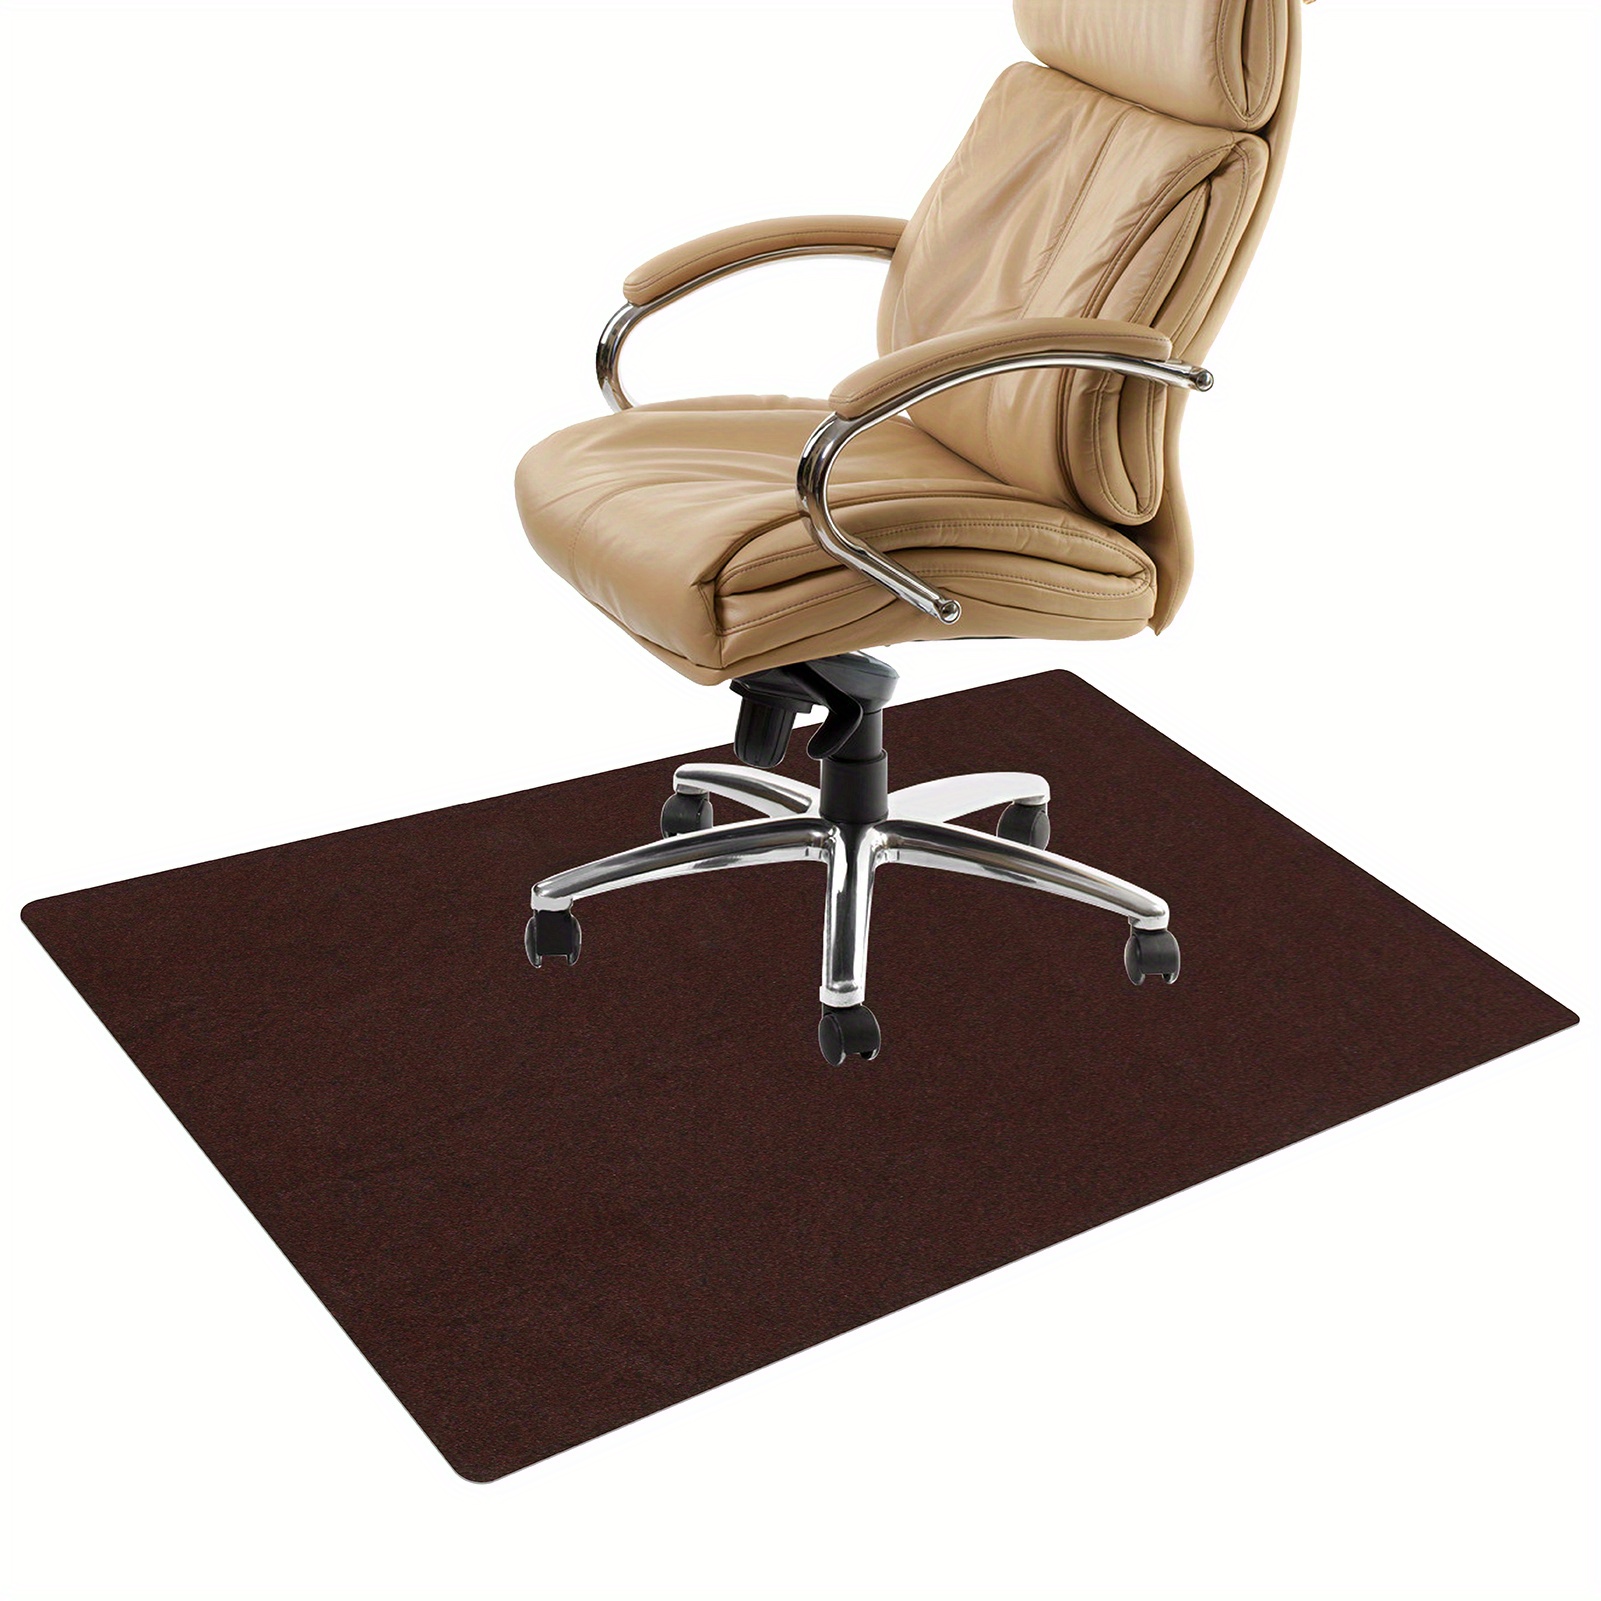 Chair Mats for Carpeted Home Office Floors